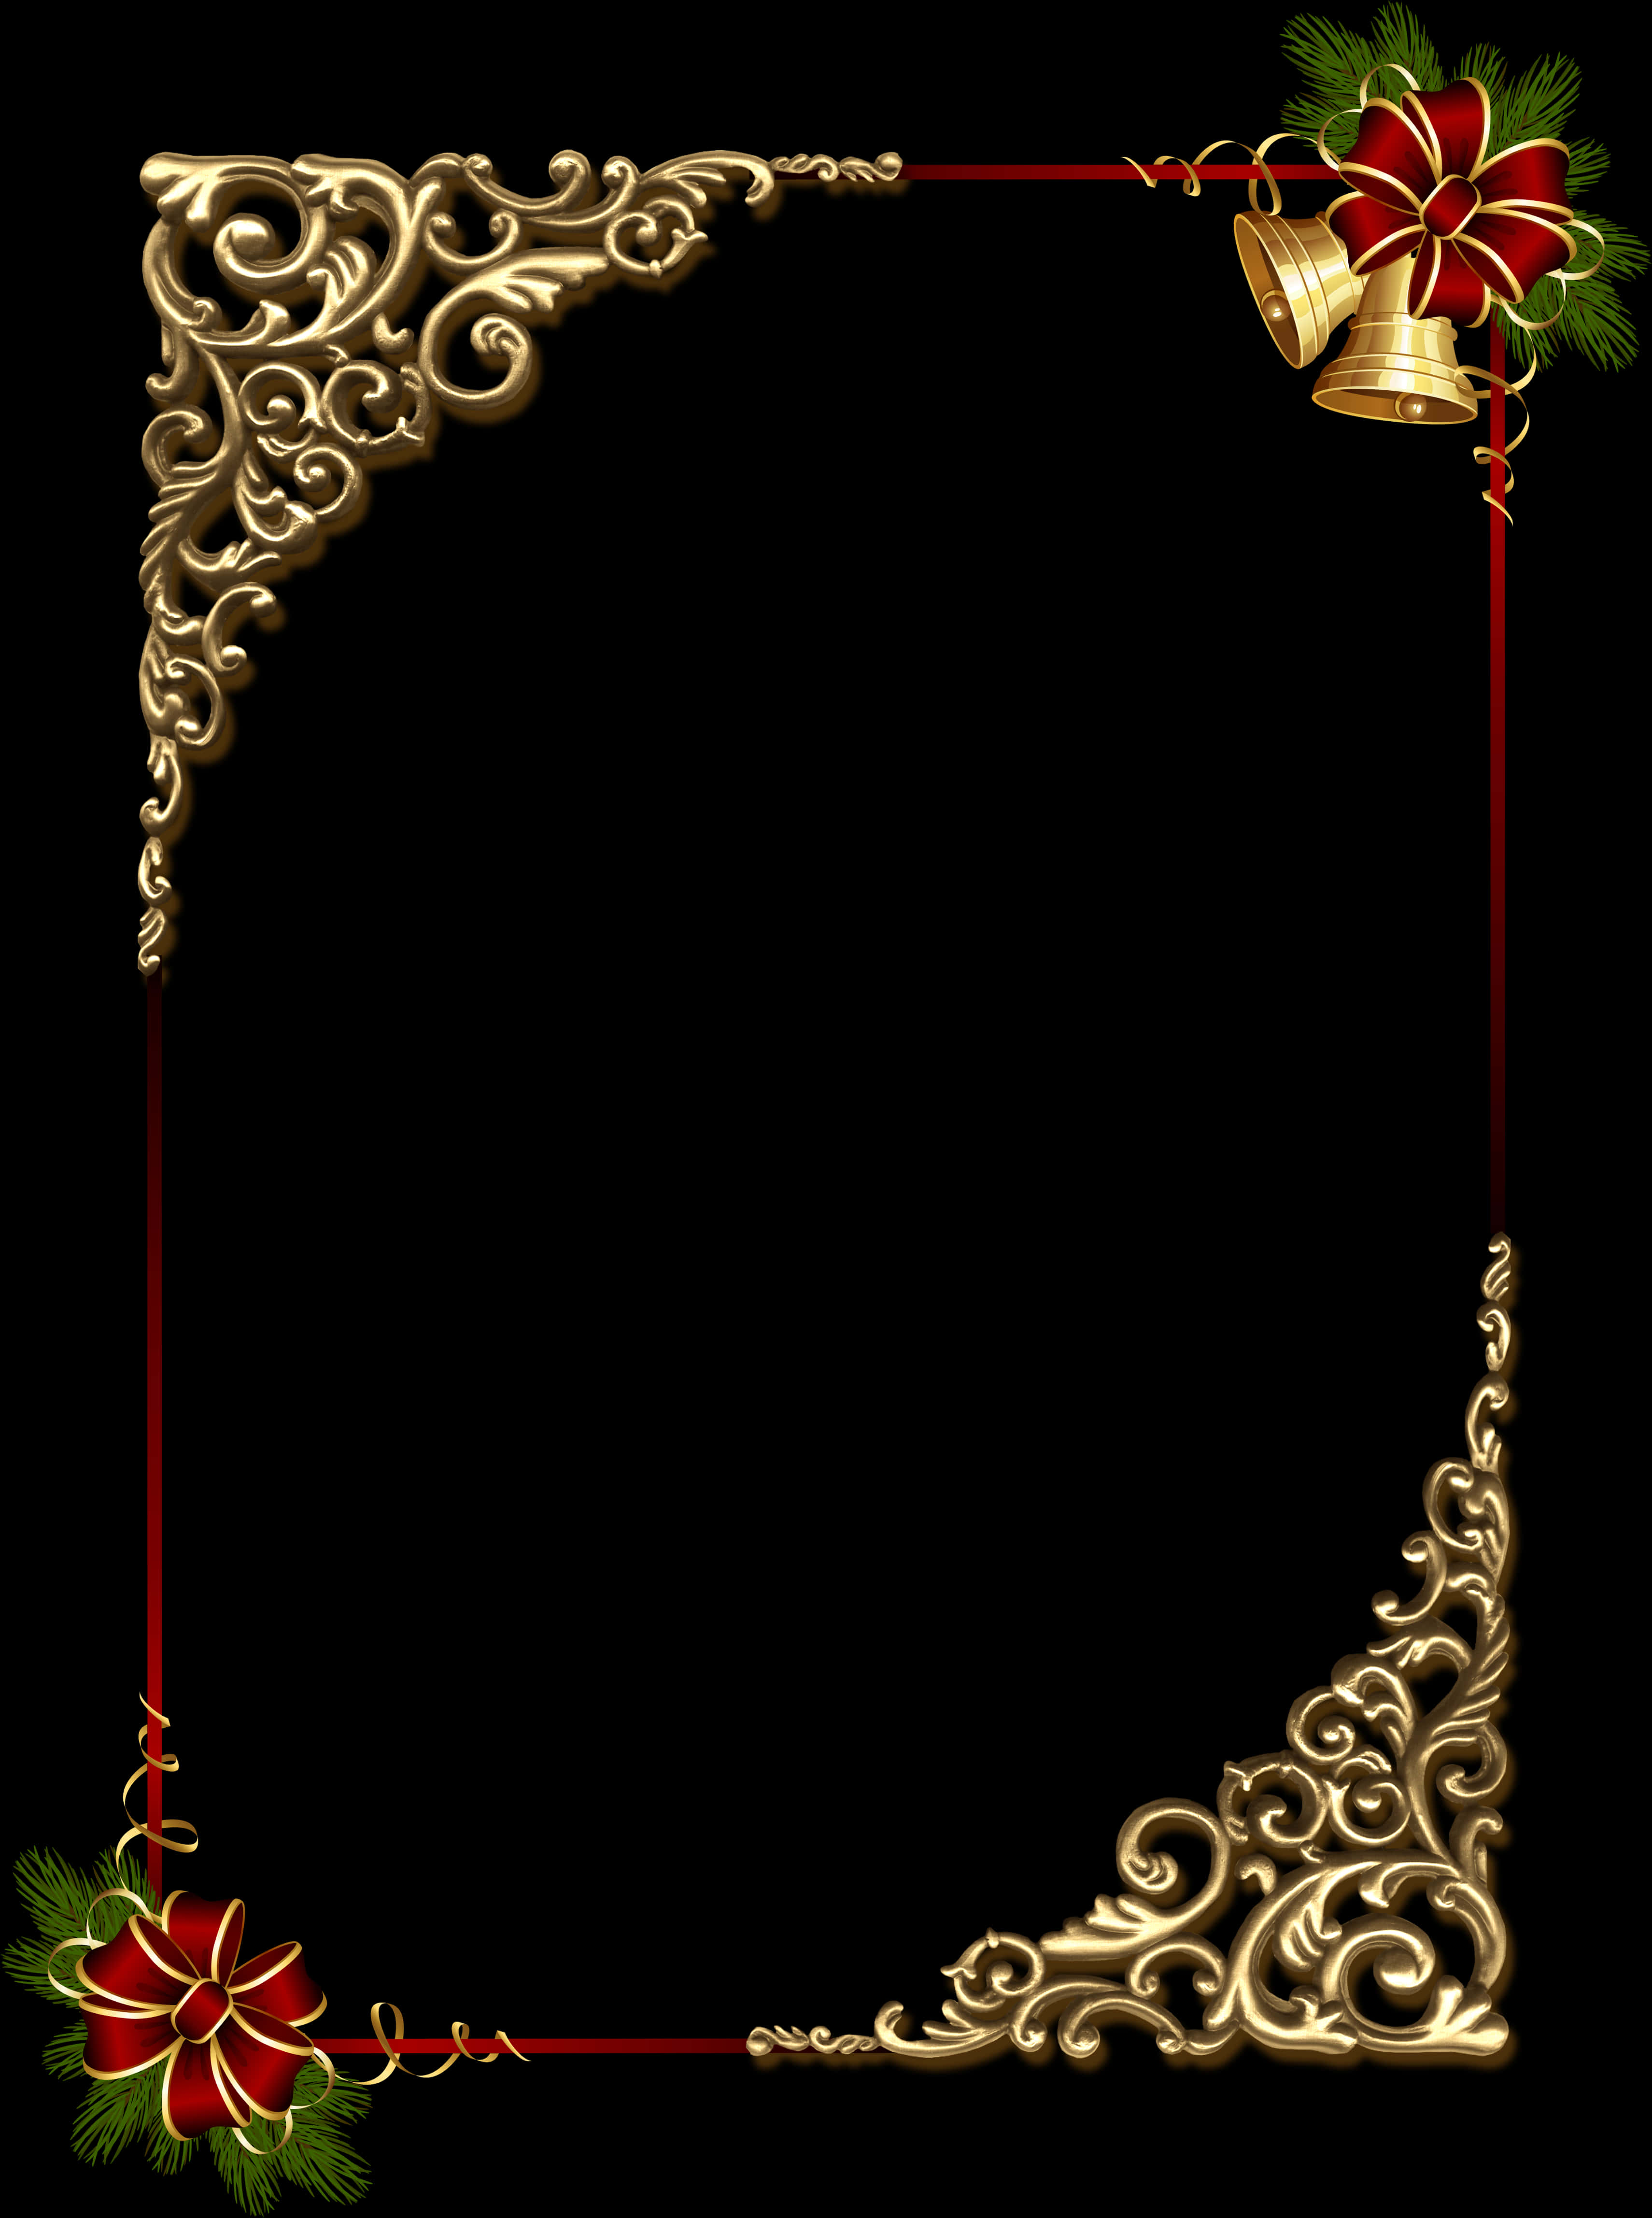 A Gold Frame With Bells And Holly On A Black Background